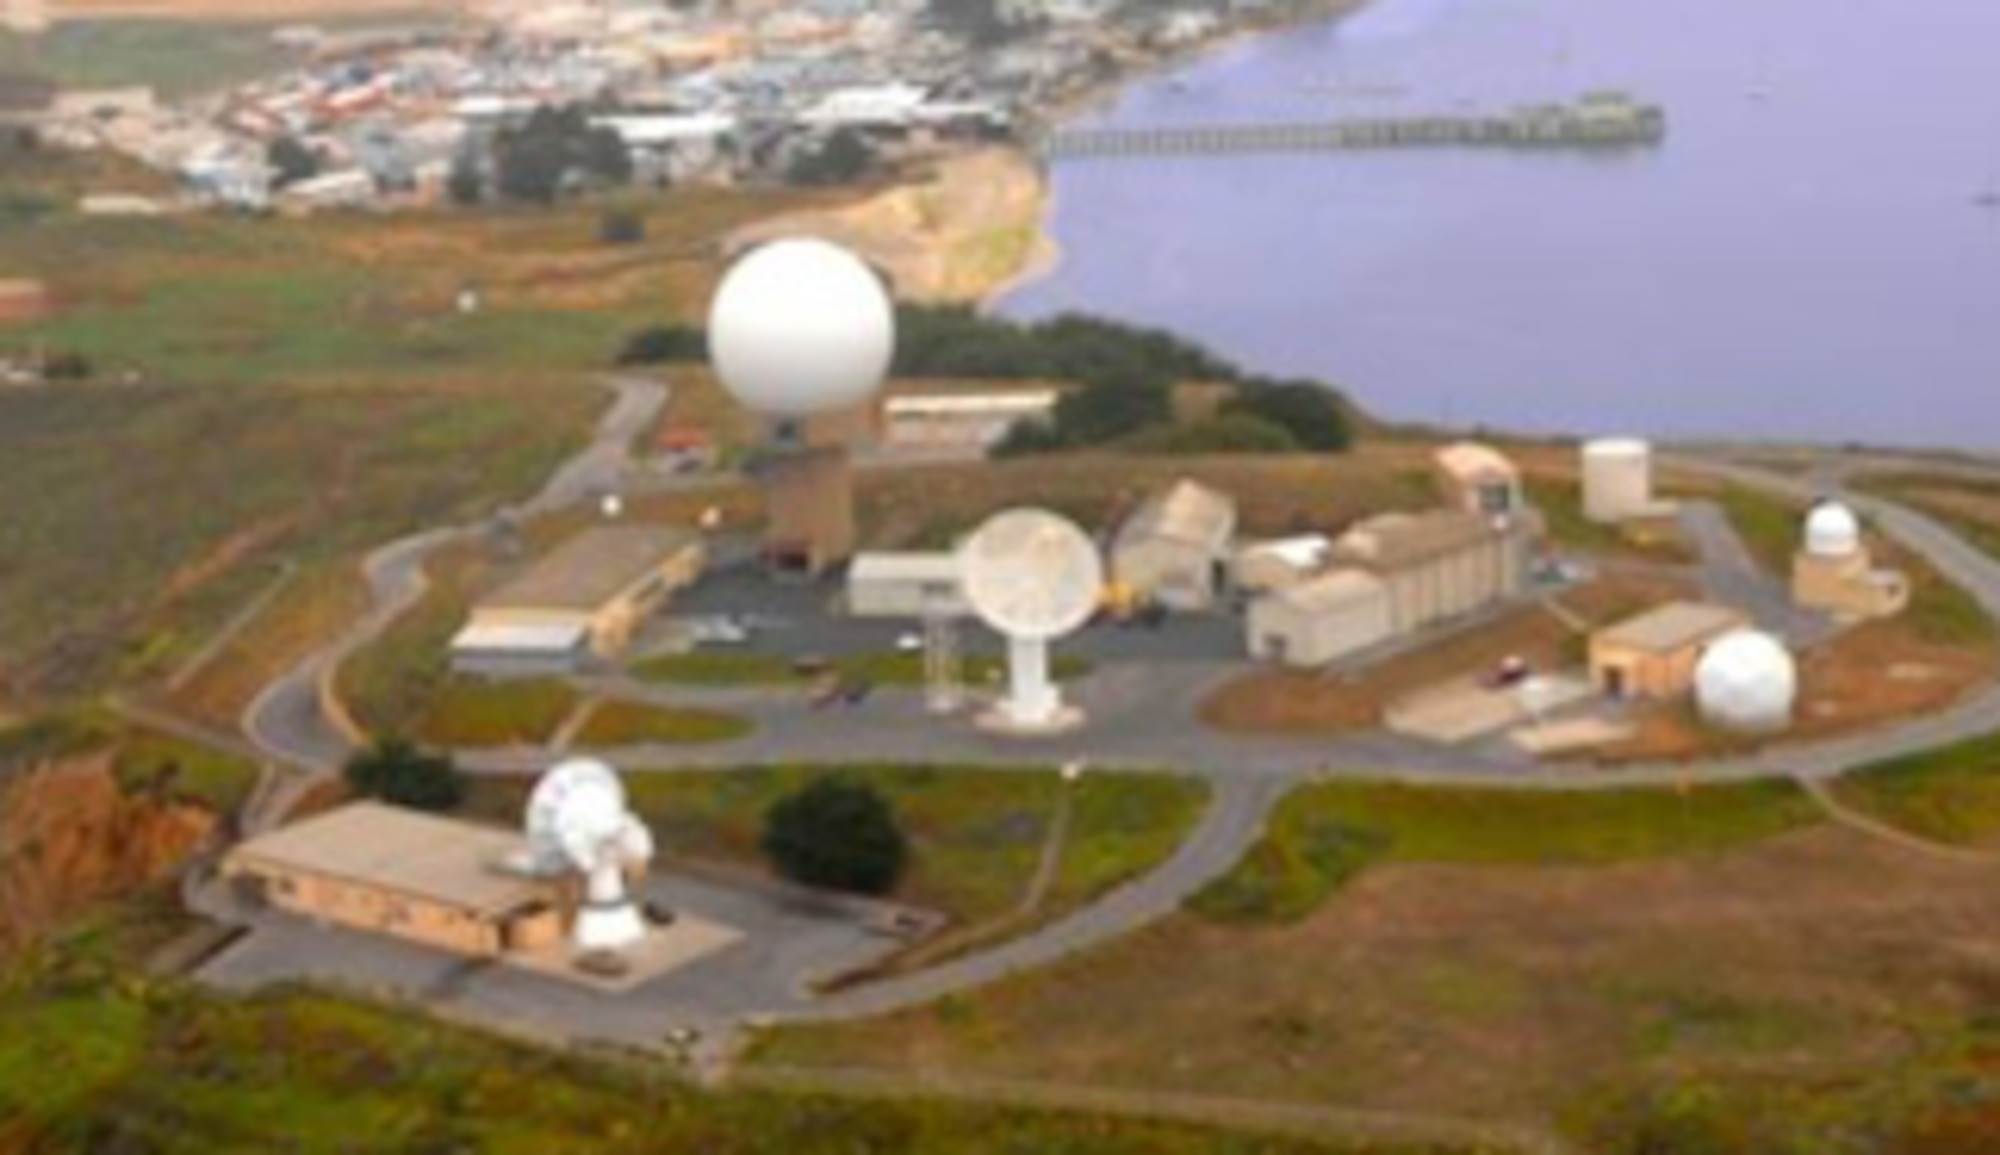 Pillar Point AFS located in Half Moon Bay, Calif., is part of the Launch and Test Range System managed by SMC. 